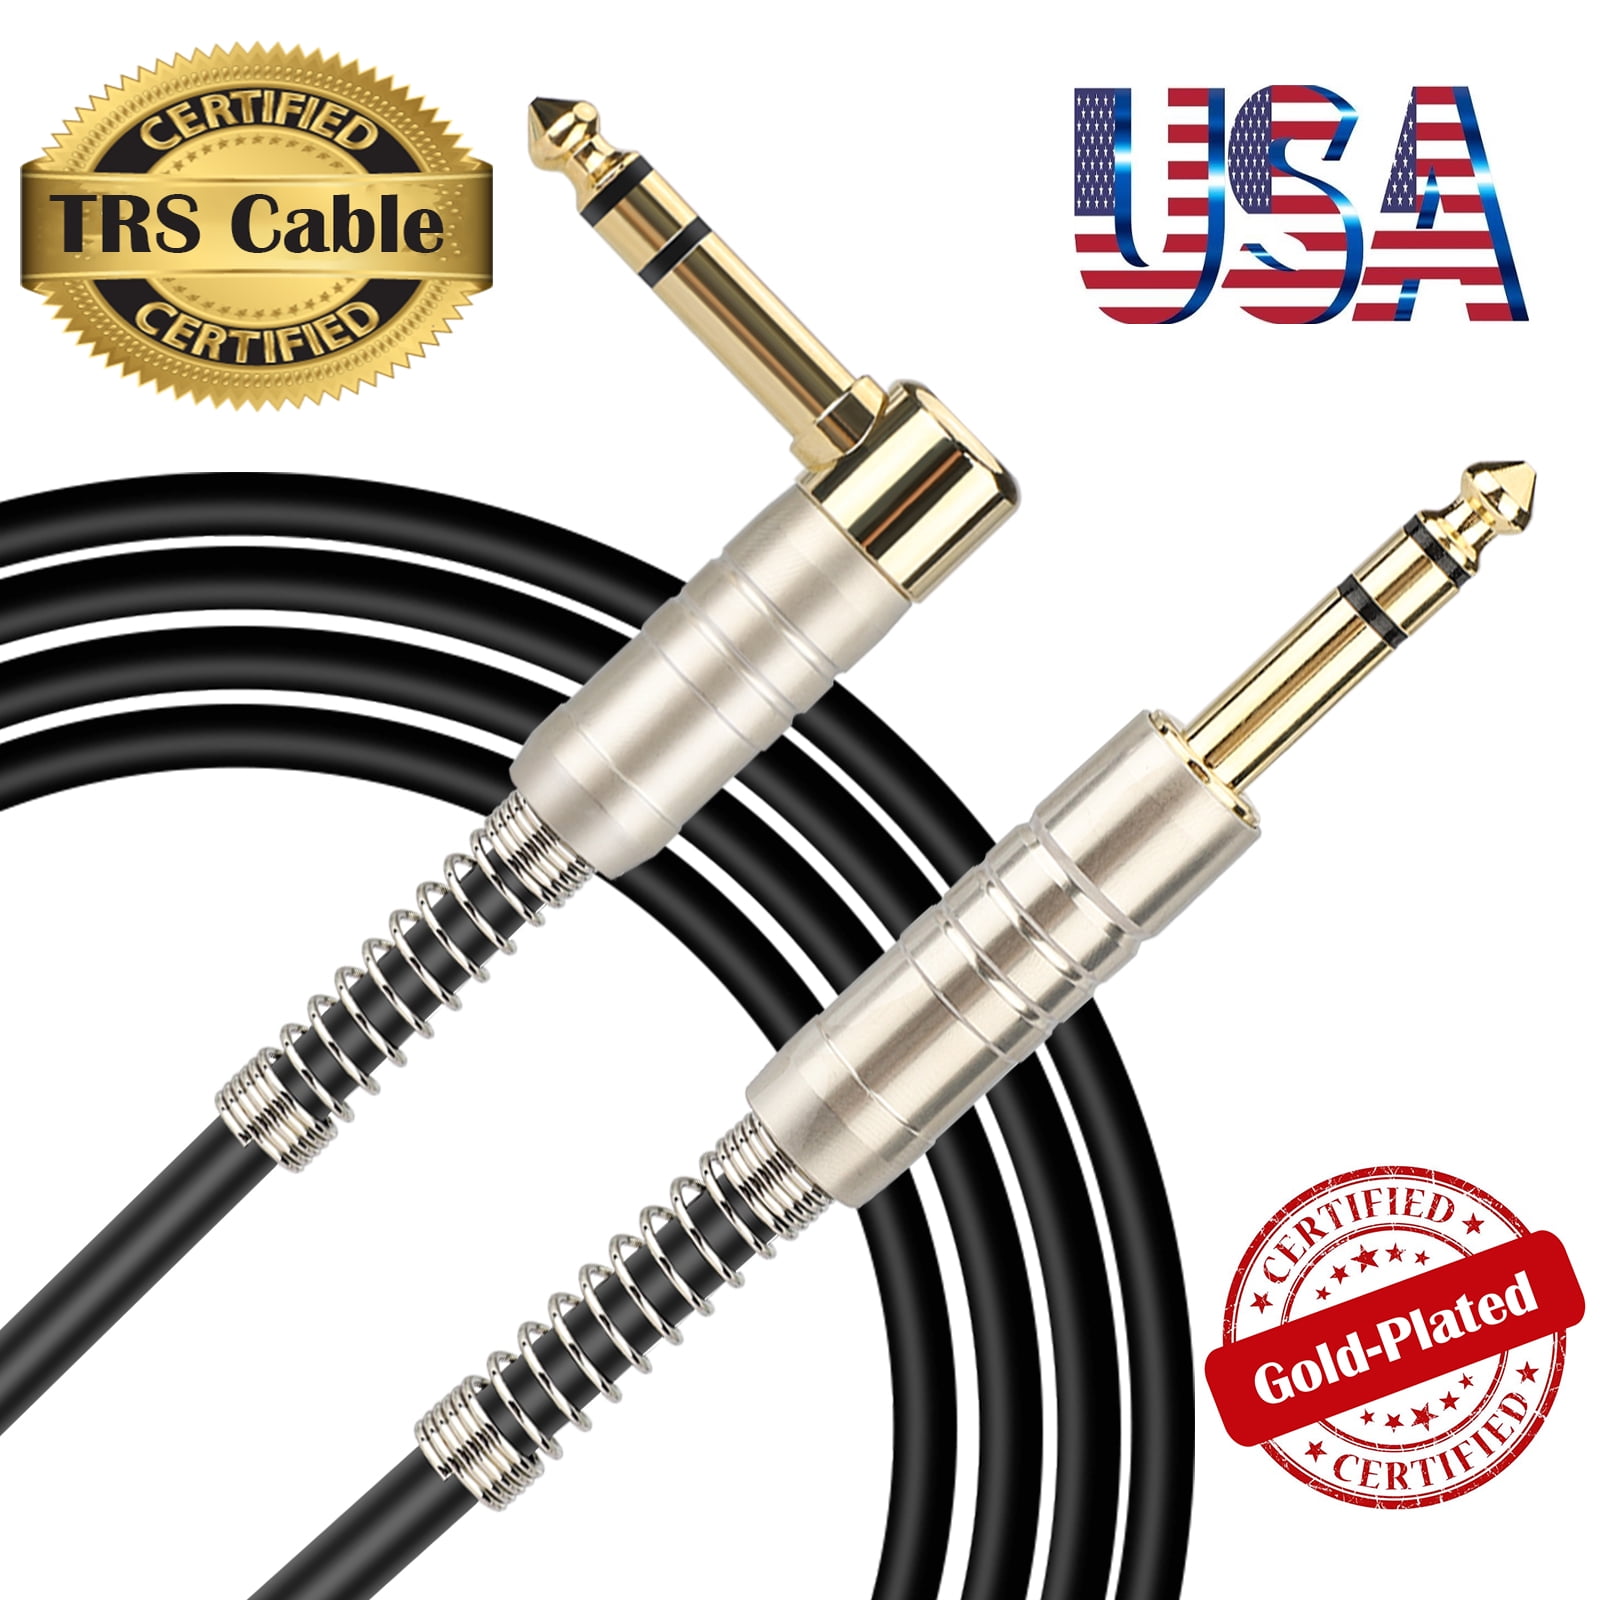 JOLGOO 1/4 inch TRS Cable Straight to Right Angle 1/4 Inch 6.35mm Stereo Audio Cable for Studio Monitors,Mixer,Yamaha Speaker/Receiver 10 Feet 